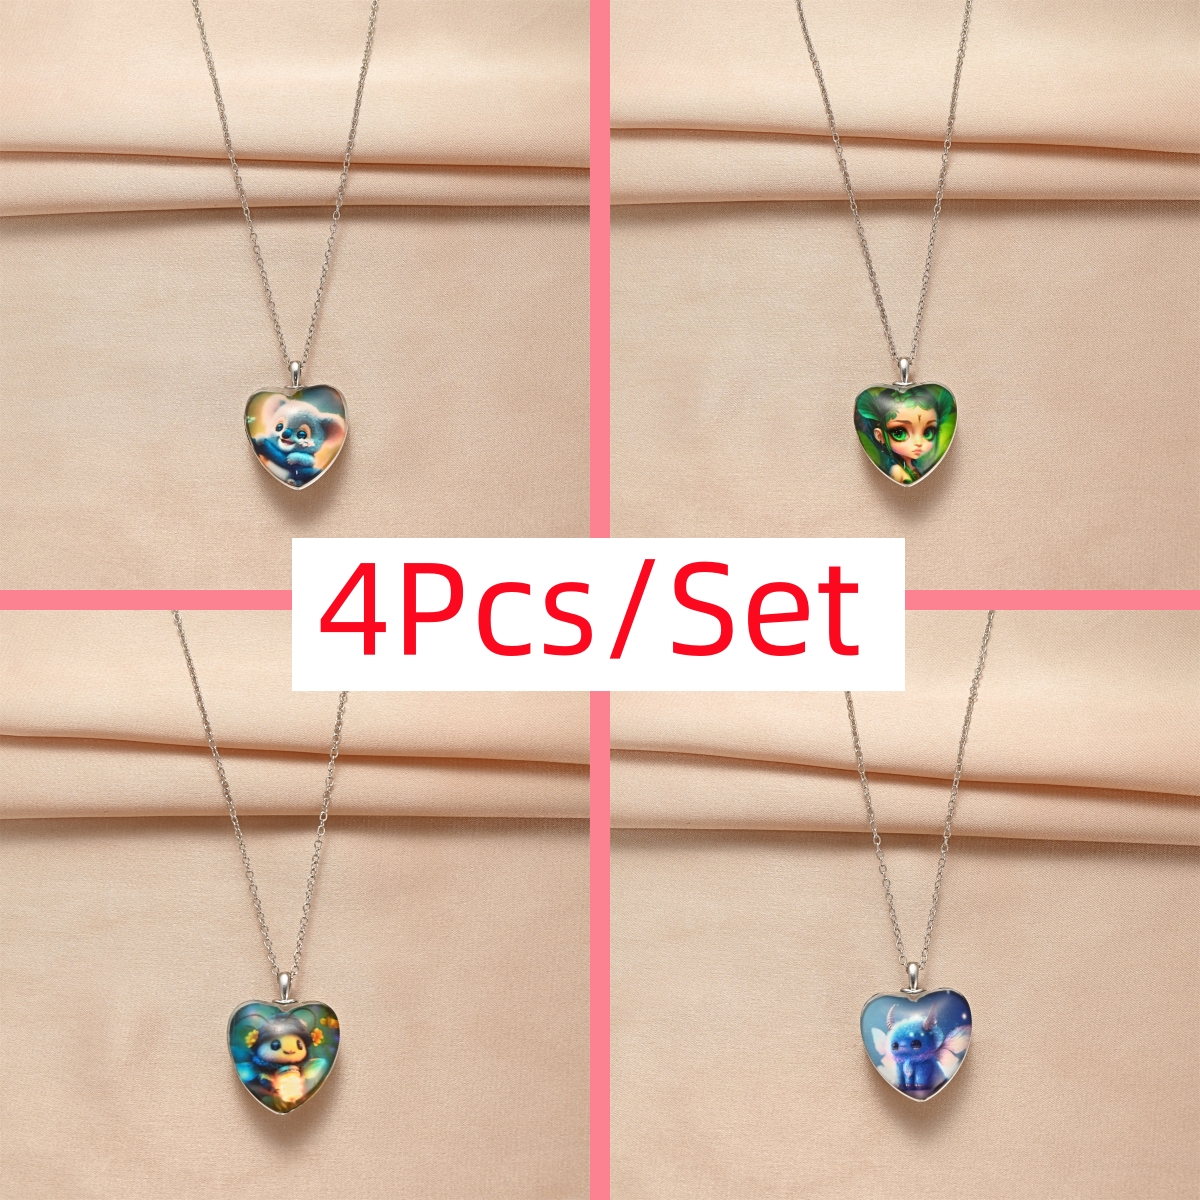 4pcs/set Trendy Cute Exquisite Pendant Necklaces, Creative Heart-shaped  Animal Dragon Eagle Necklace, Anniversary Birthday Holiday Party Gift For